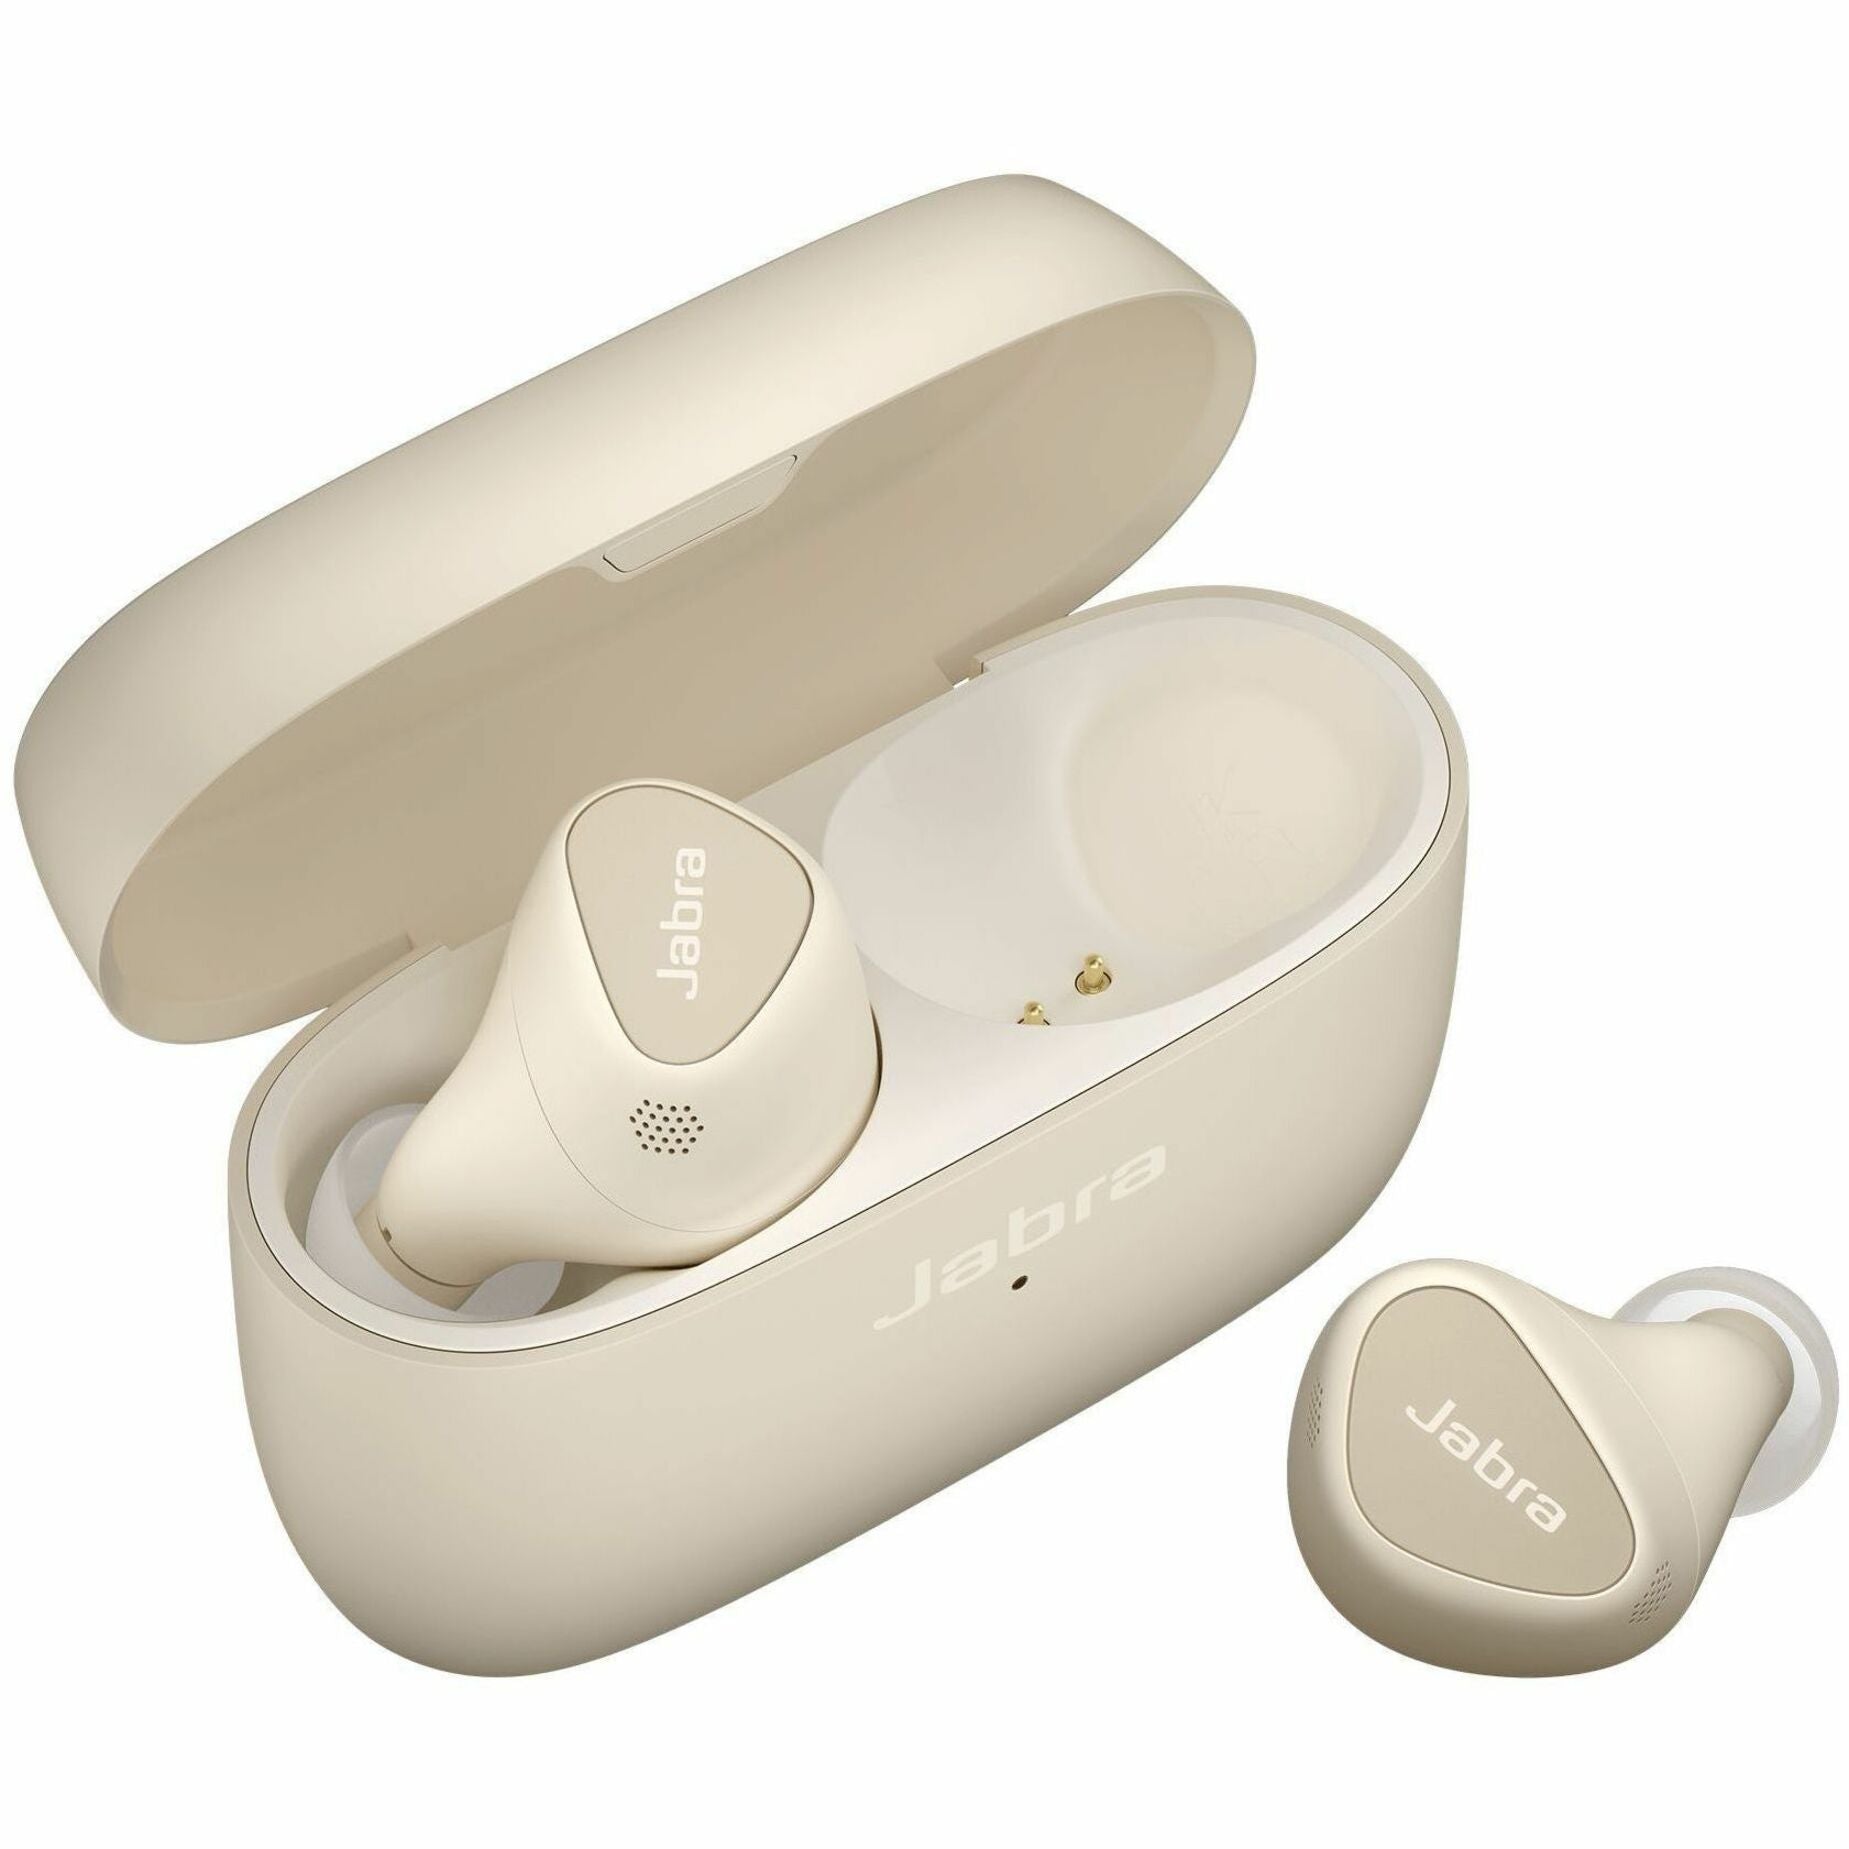 Jabra 100-99280901-99 Elite 10 Earset, Binaural Earbud with 2 Year Warranty, Integrated Microphone, Android/Windows Compatible, IP57 Rated, Rechargeable Battery, Volume/Play/Pause Controls, Cream Color